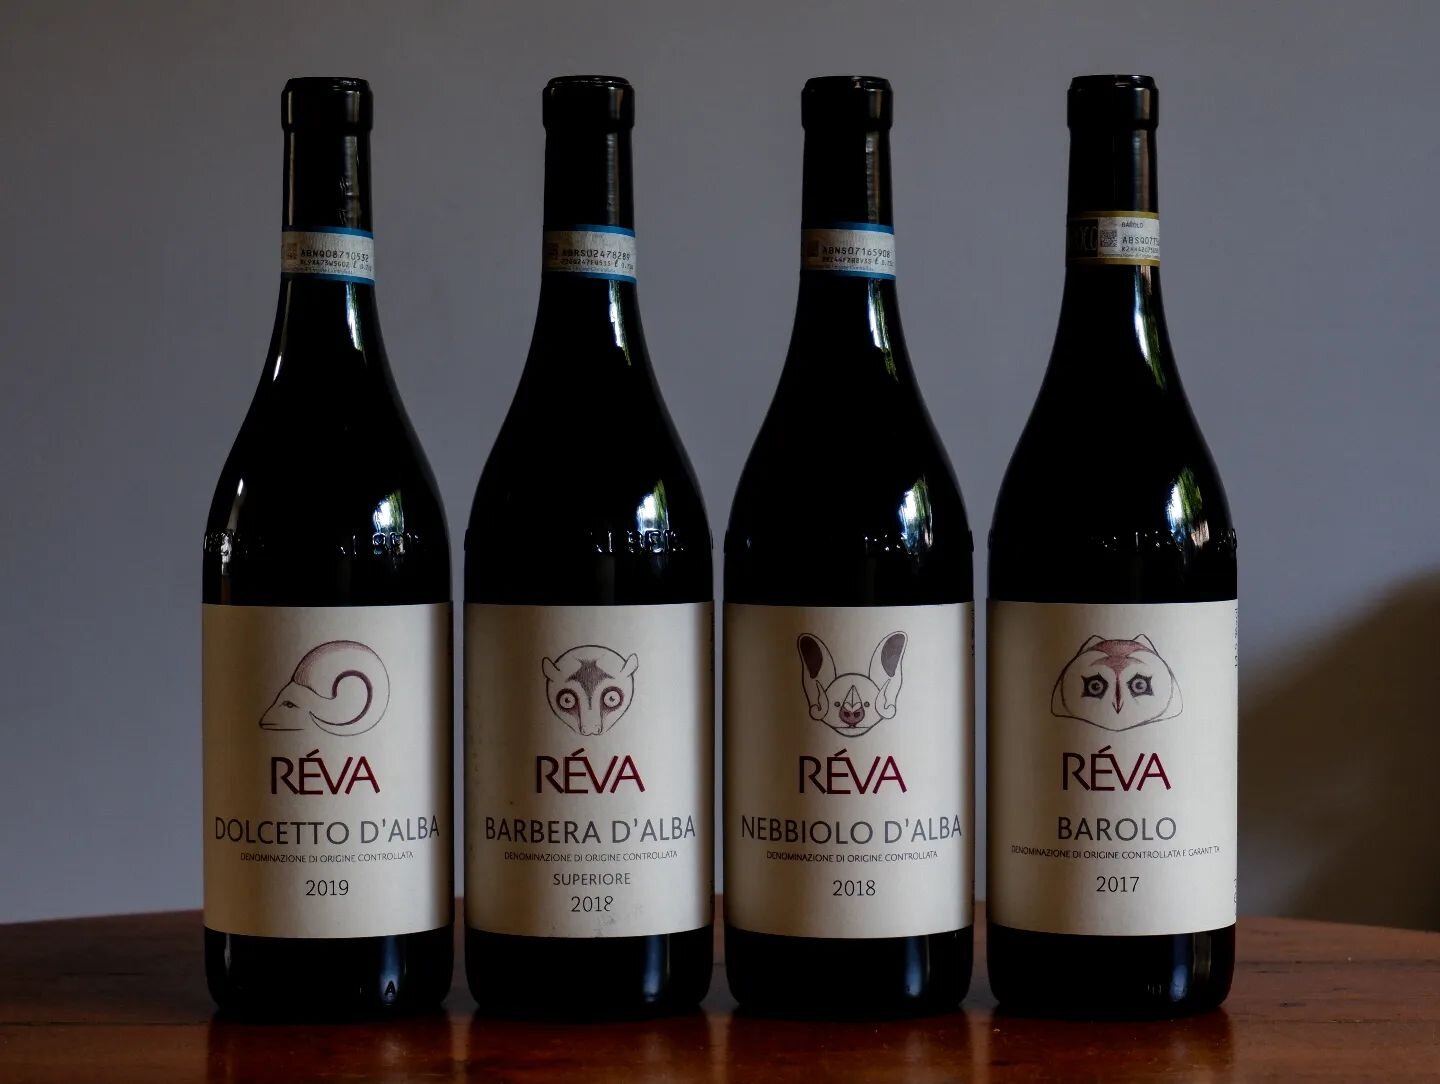 R&eacute;va - Certified Organic Piedmont

&quot;They have defined our wines as 'neo-classical', a description that we fully embrace. We are 'classic' because we seek elegance, harmony, rigour and purity. But we do it with a modern, genuinely contempo